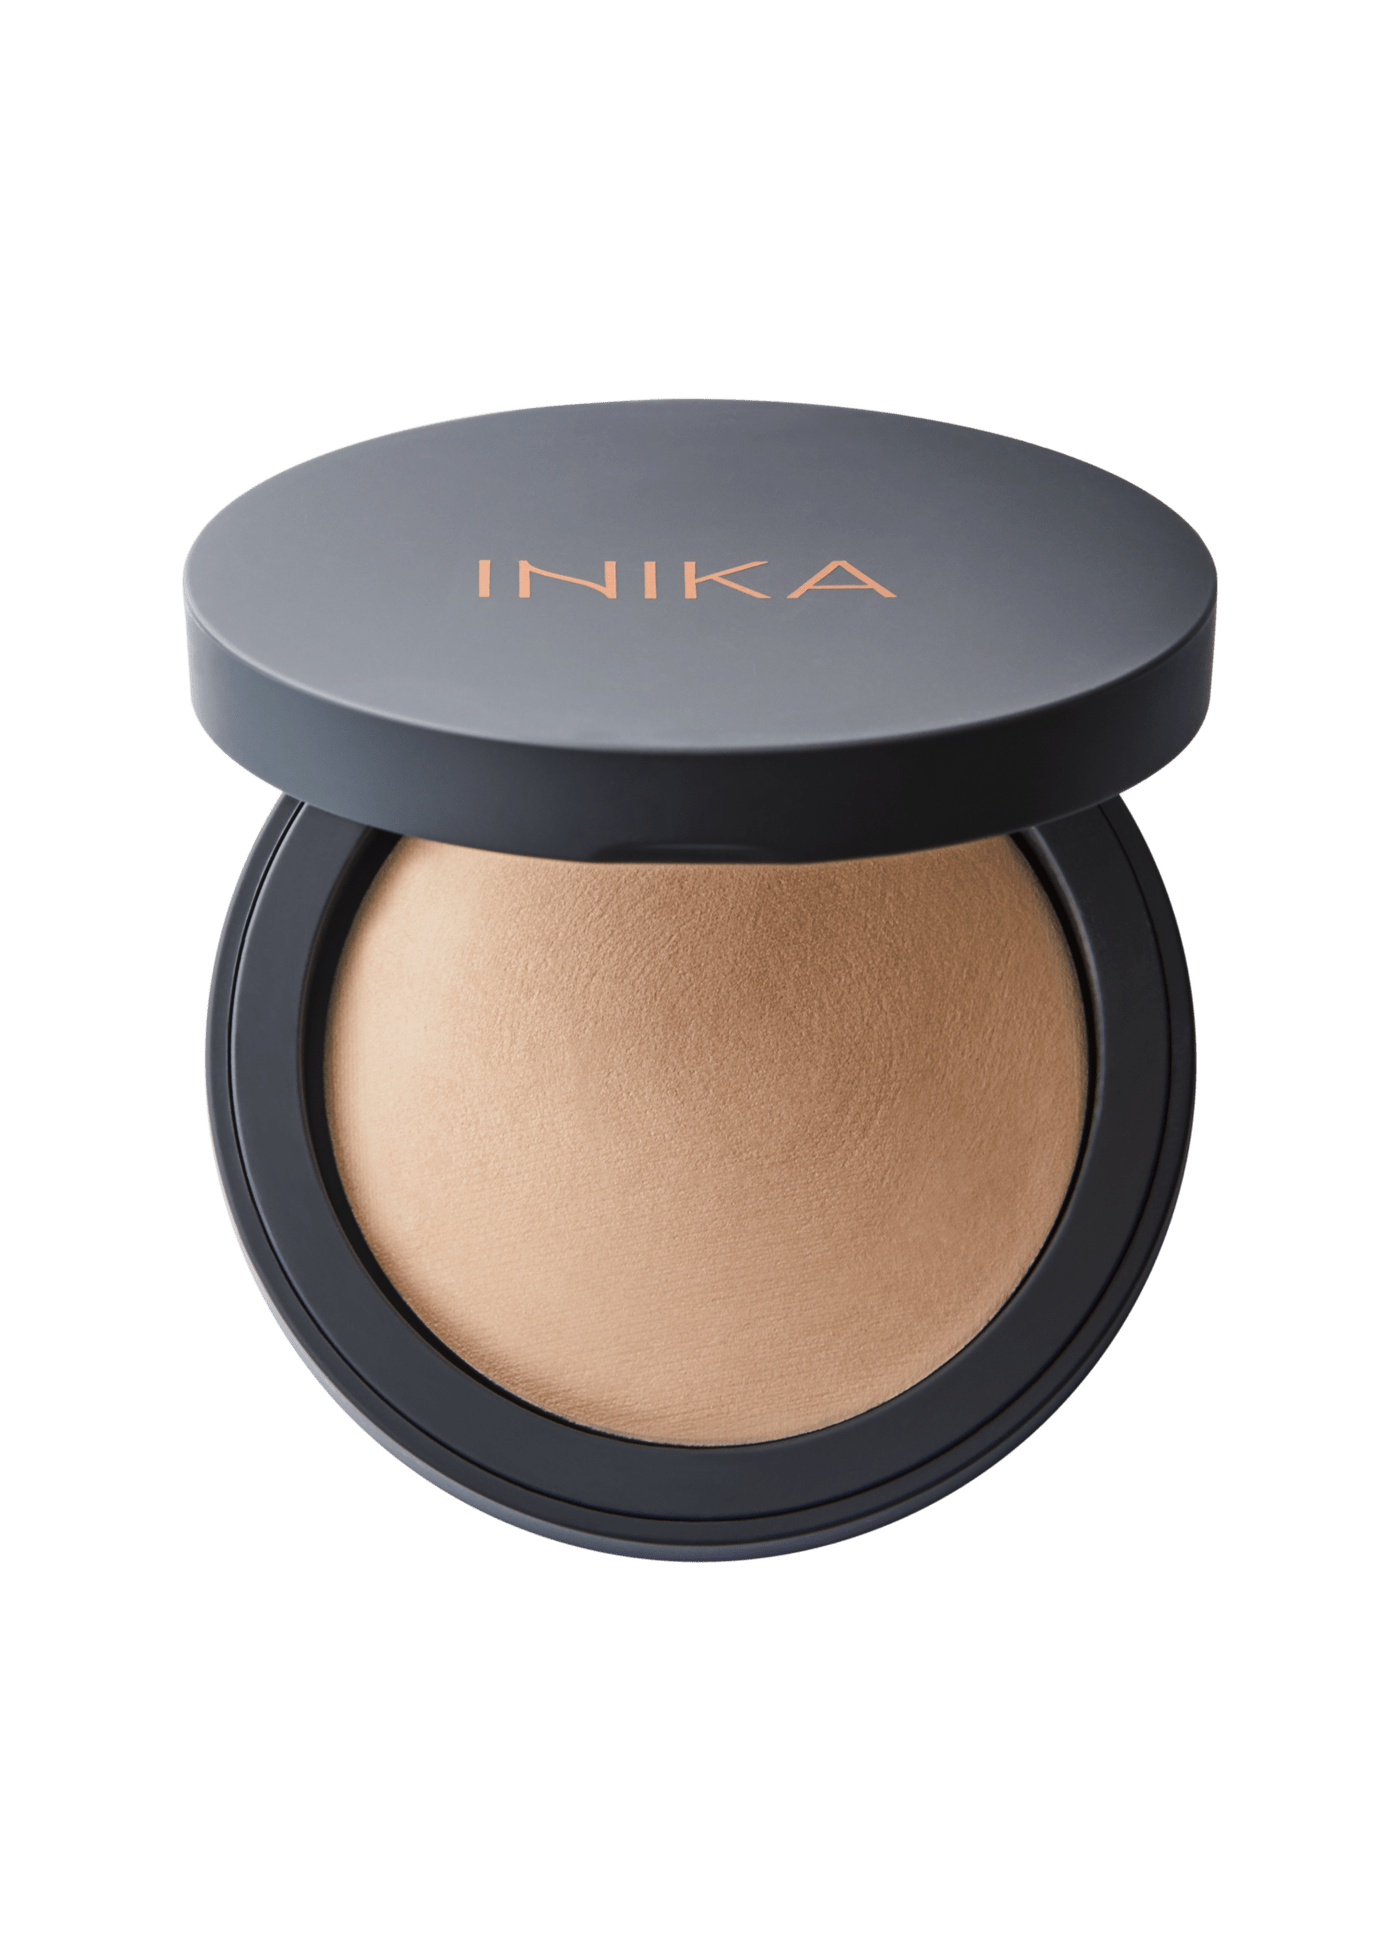 Baked Mineral Foundation Strength